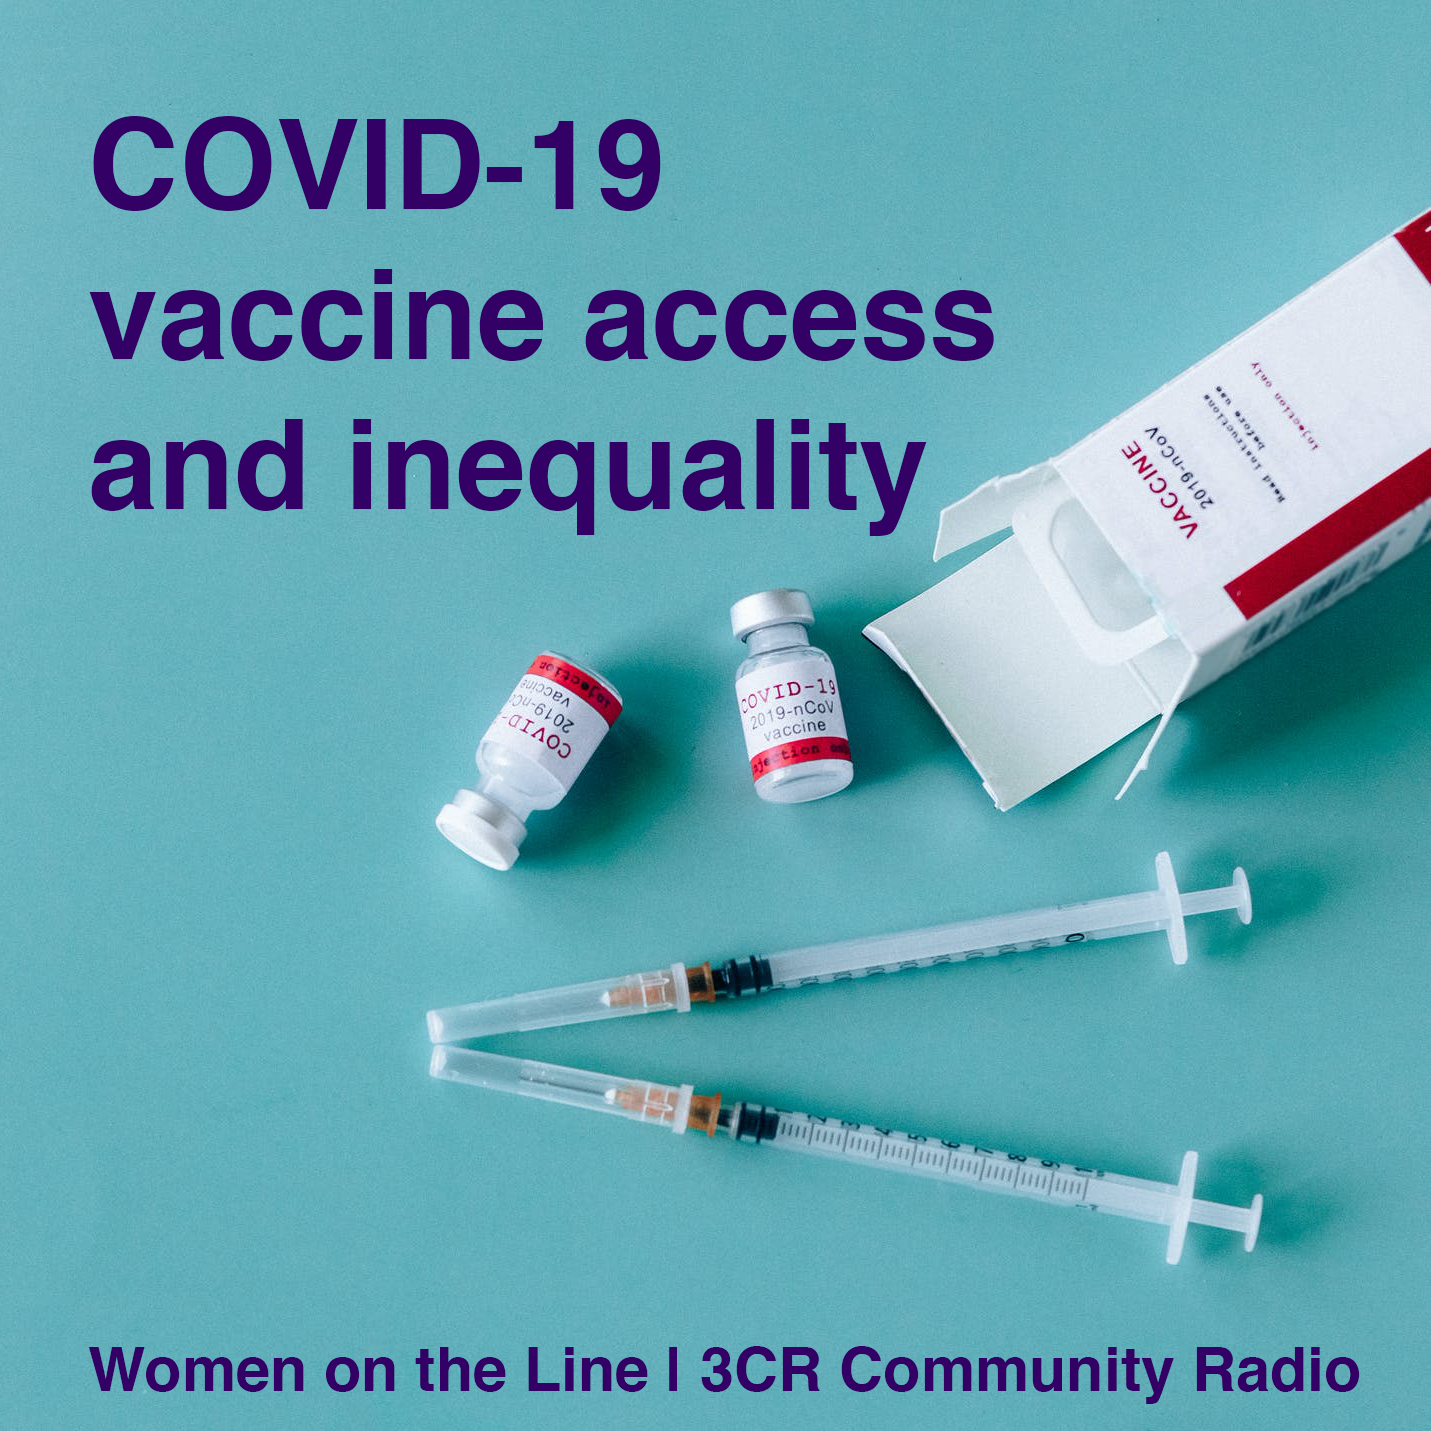 Episode image is of COVID-19 vaccine vials, box and syringes in front of a bright aqua background. Text reads "COVID-19 vaccine access and inequality"